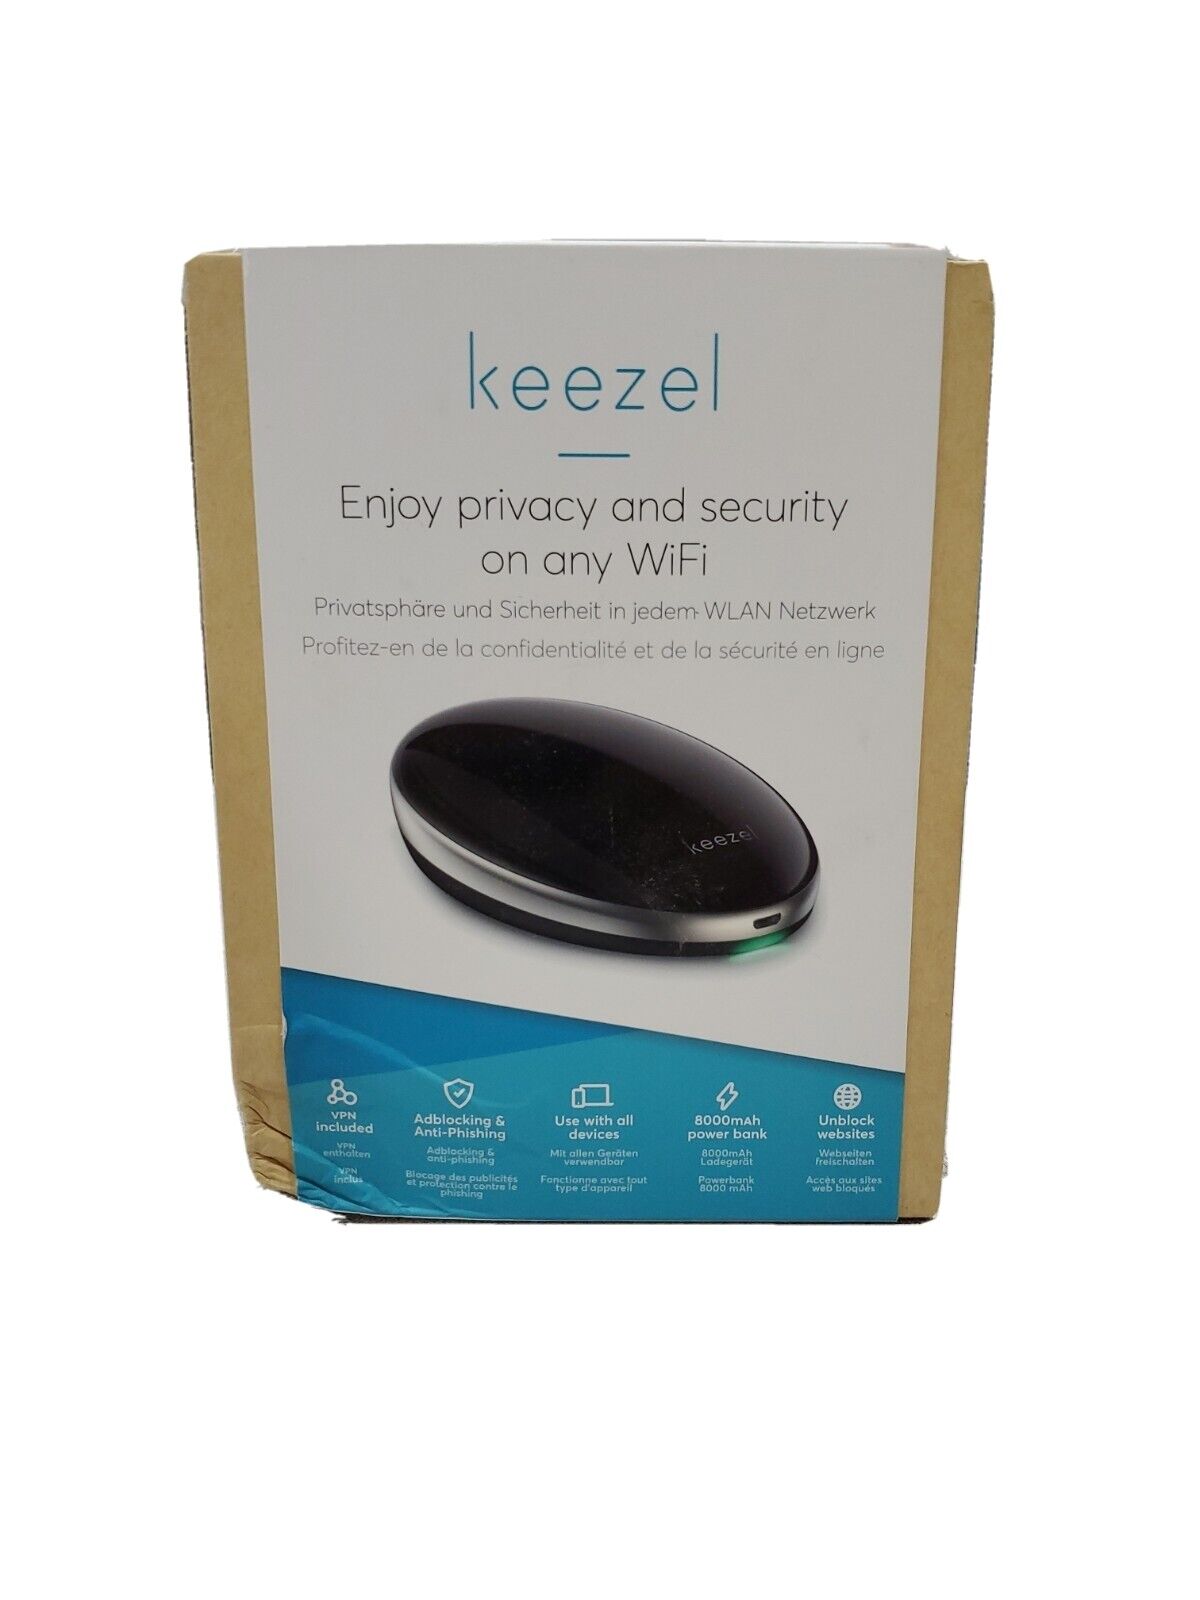 Keezel Portable Wifi Privacy Security Device - New unopened box.